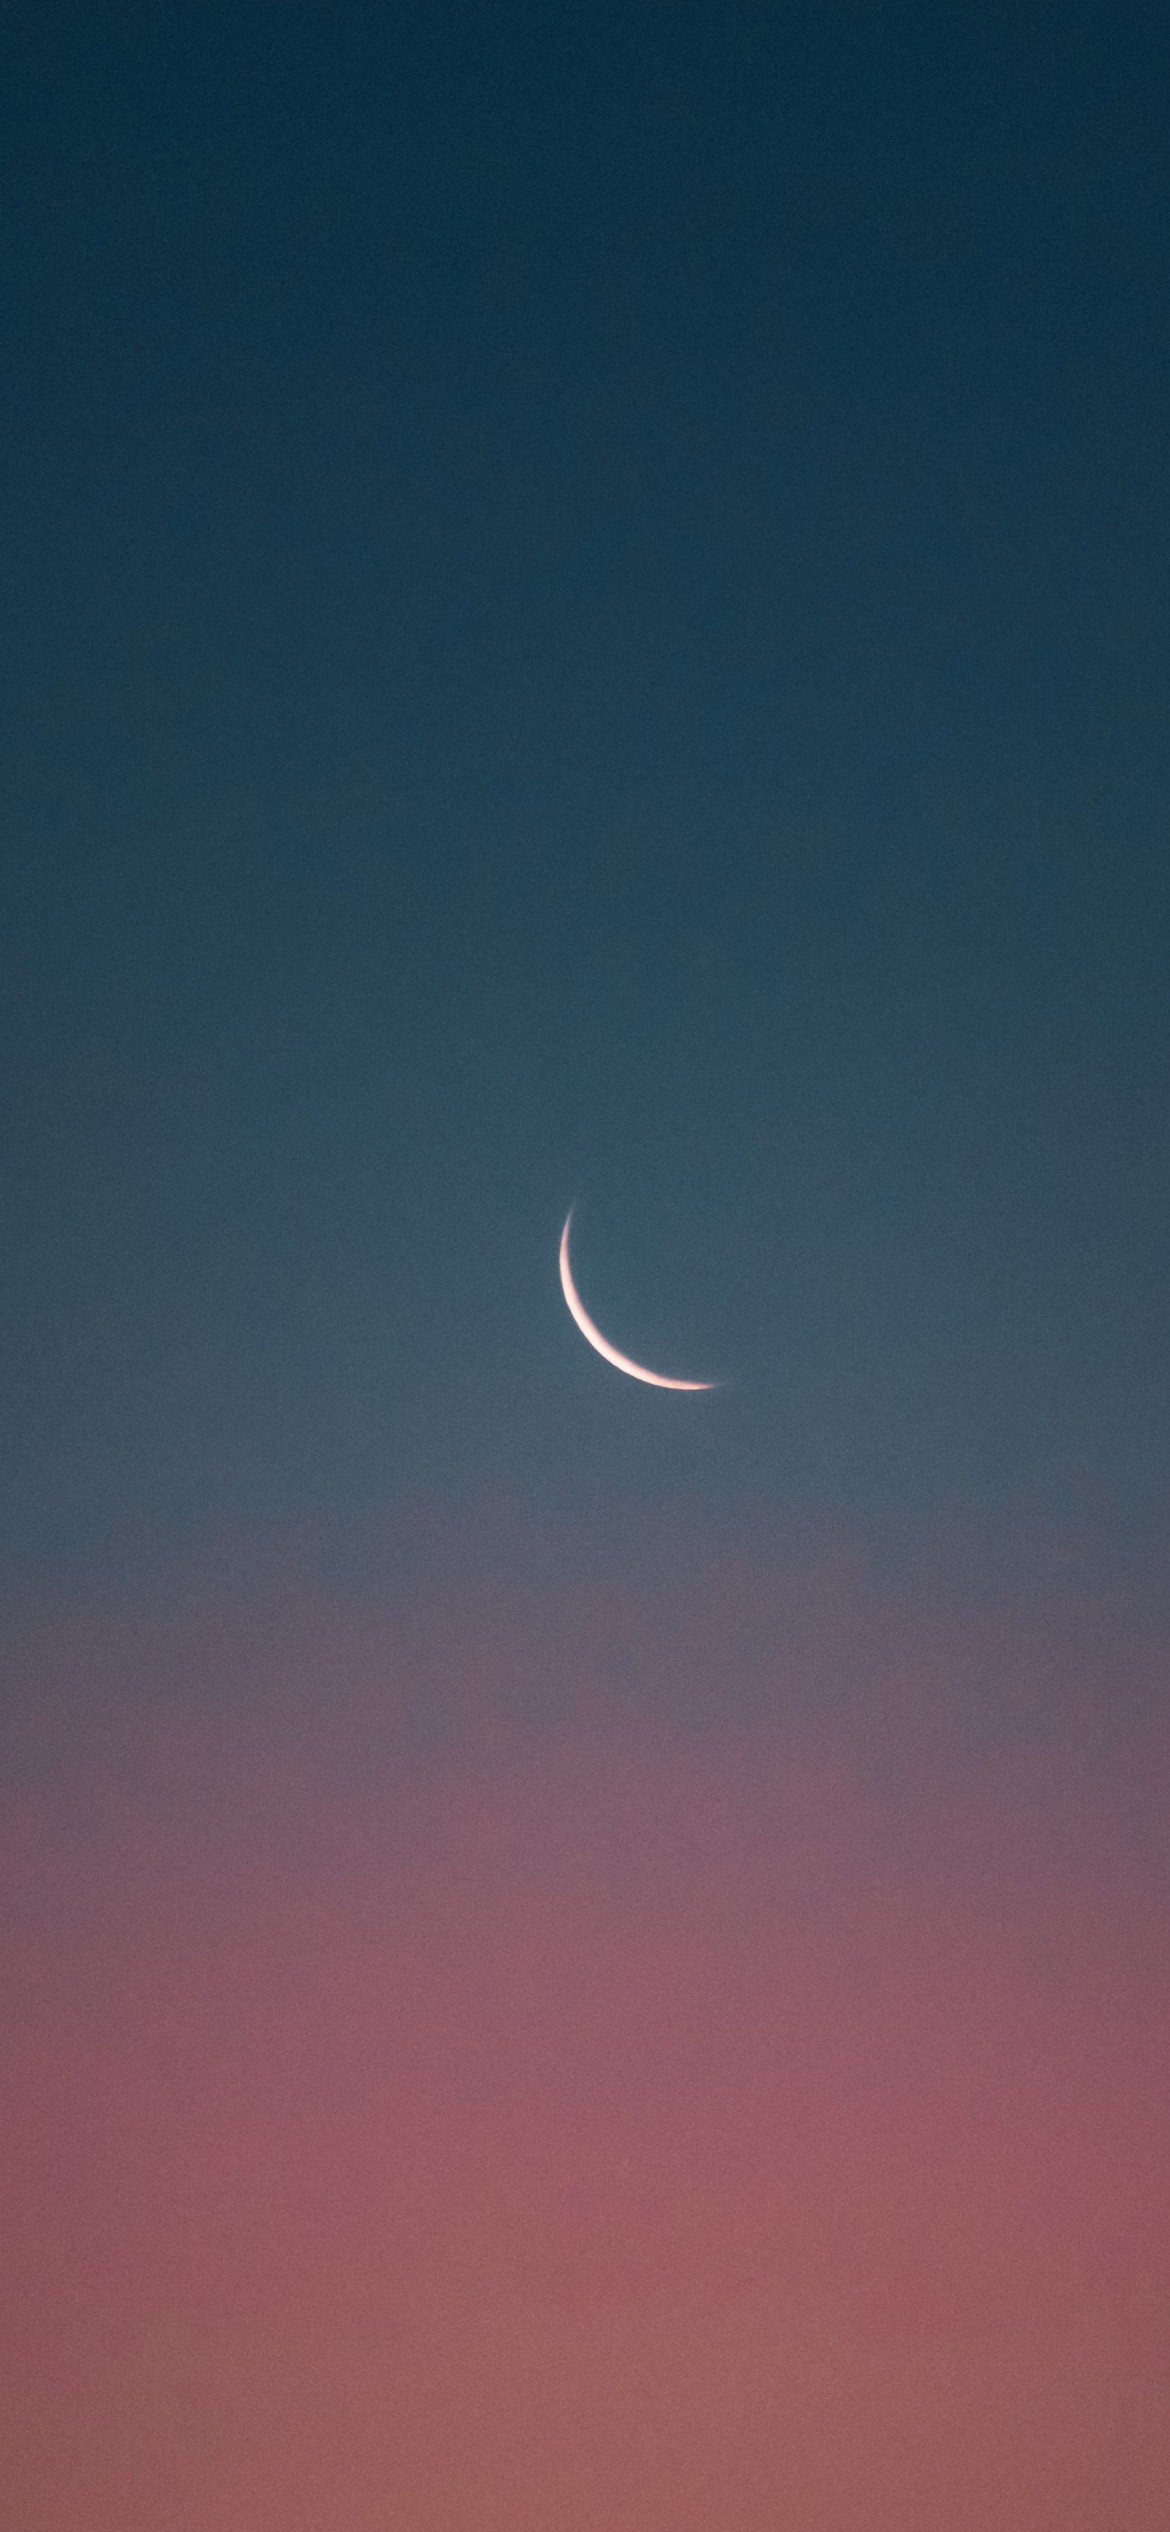 Closeup crescent view of the moon looking perfect in front of bright stars  2K wallpaper download